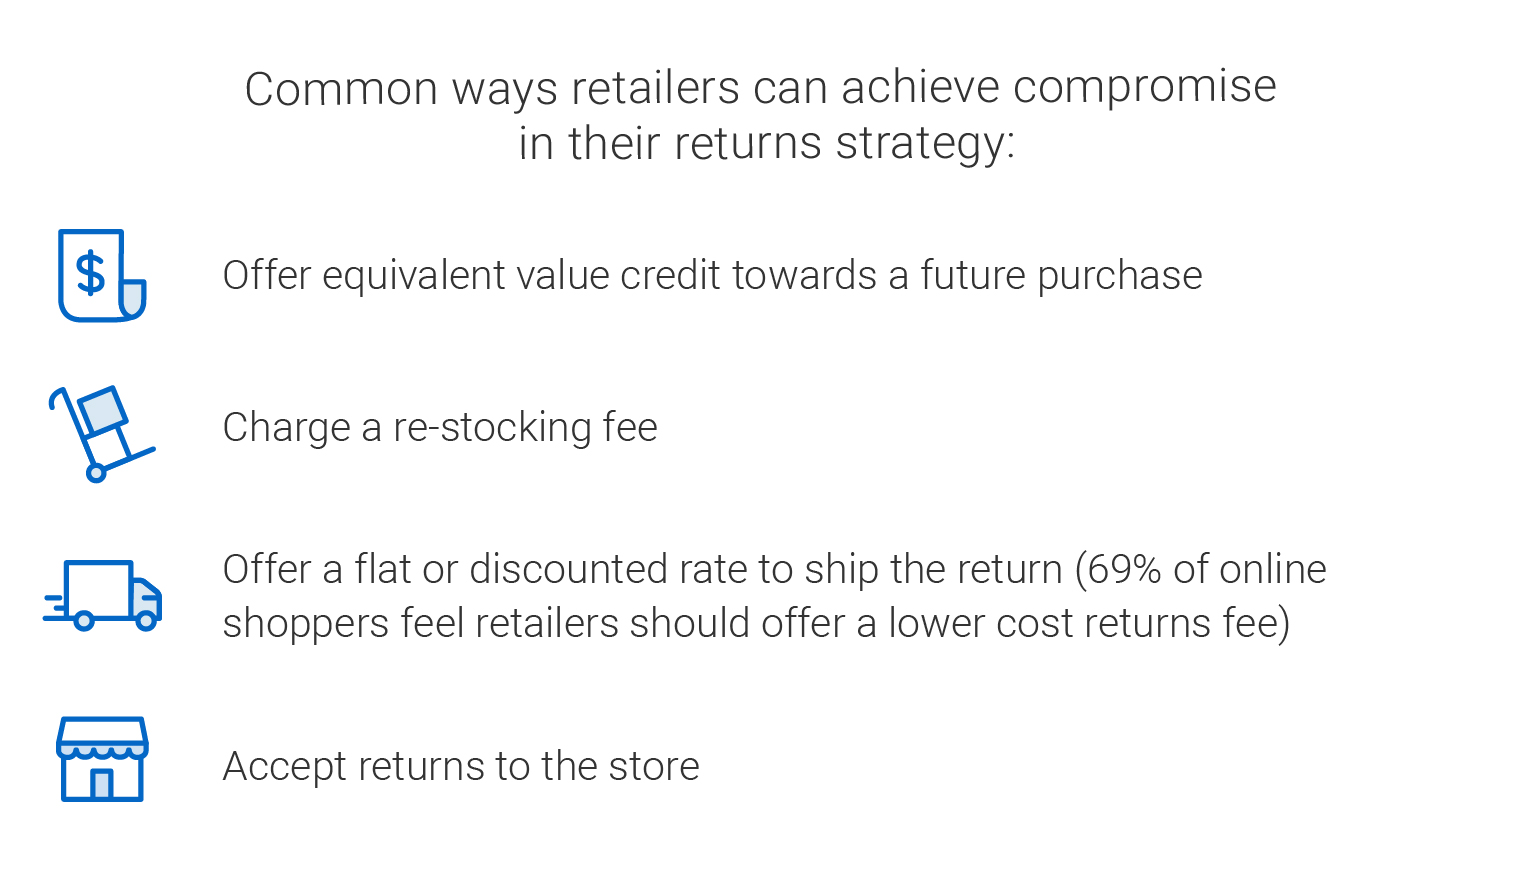 Common ways retailers can achieve compromise in their returns strategy:  Offer equivalent value credit towards a future purchase. Charge a restocking fee. Offer flat or discounted rate to ship the return (69 per cent of online shoppers feel retailers should offer a lower cost returns fee). Accept returns to the store.